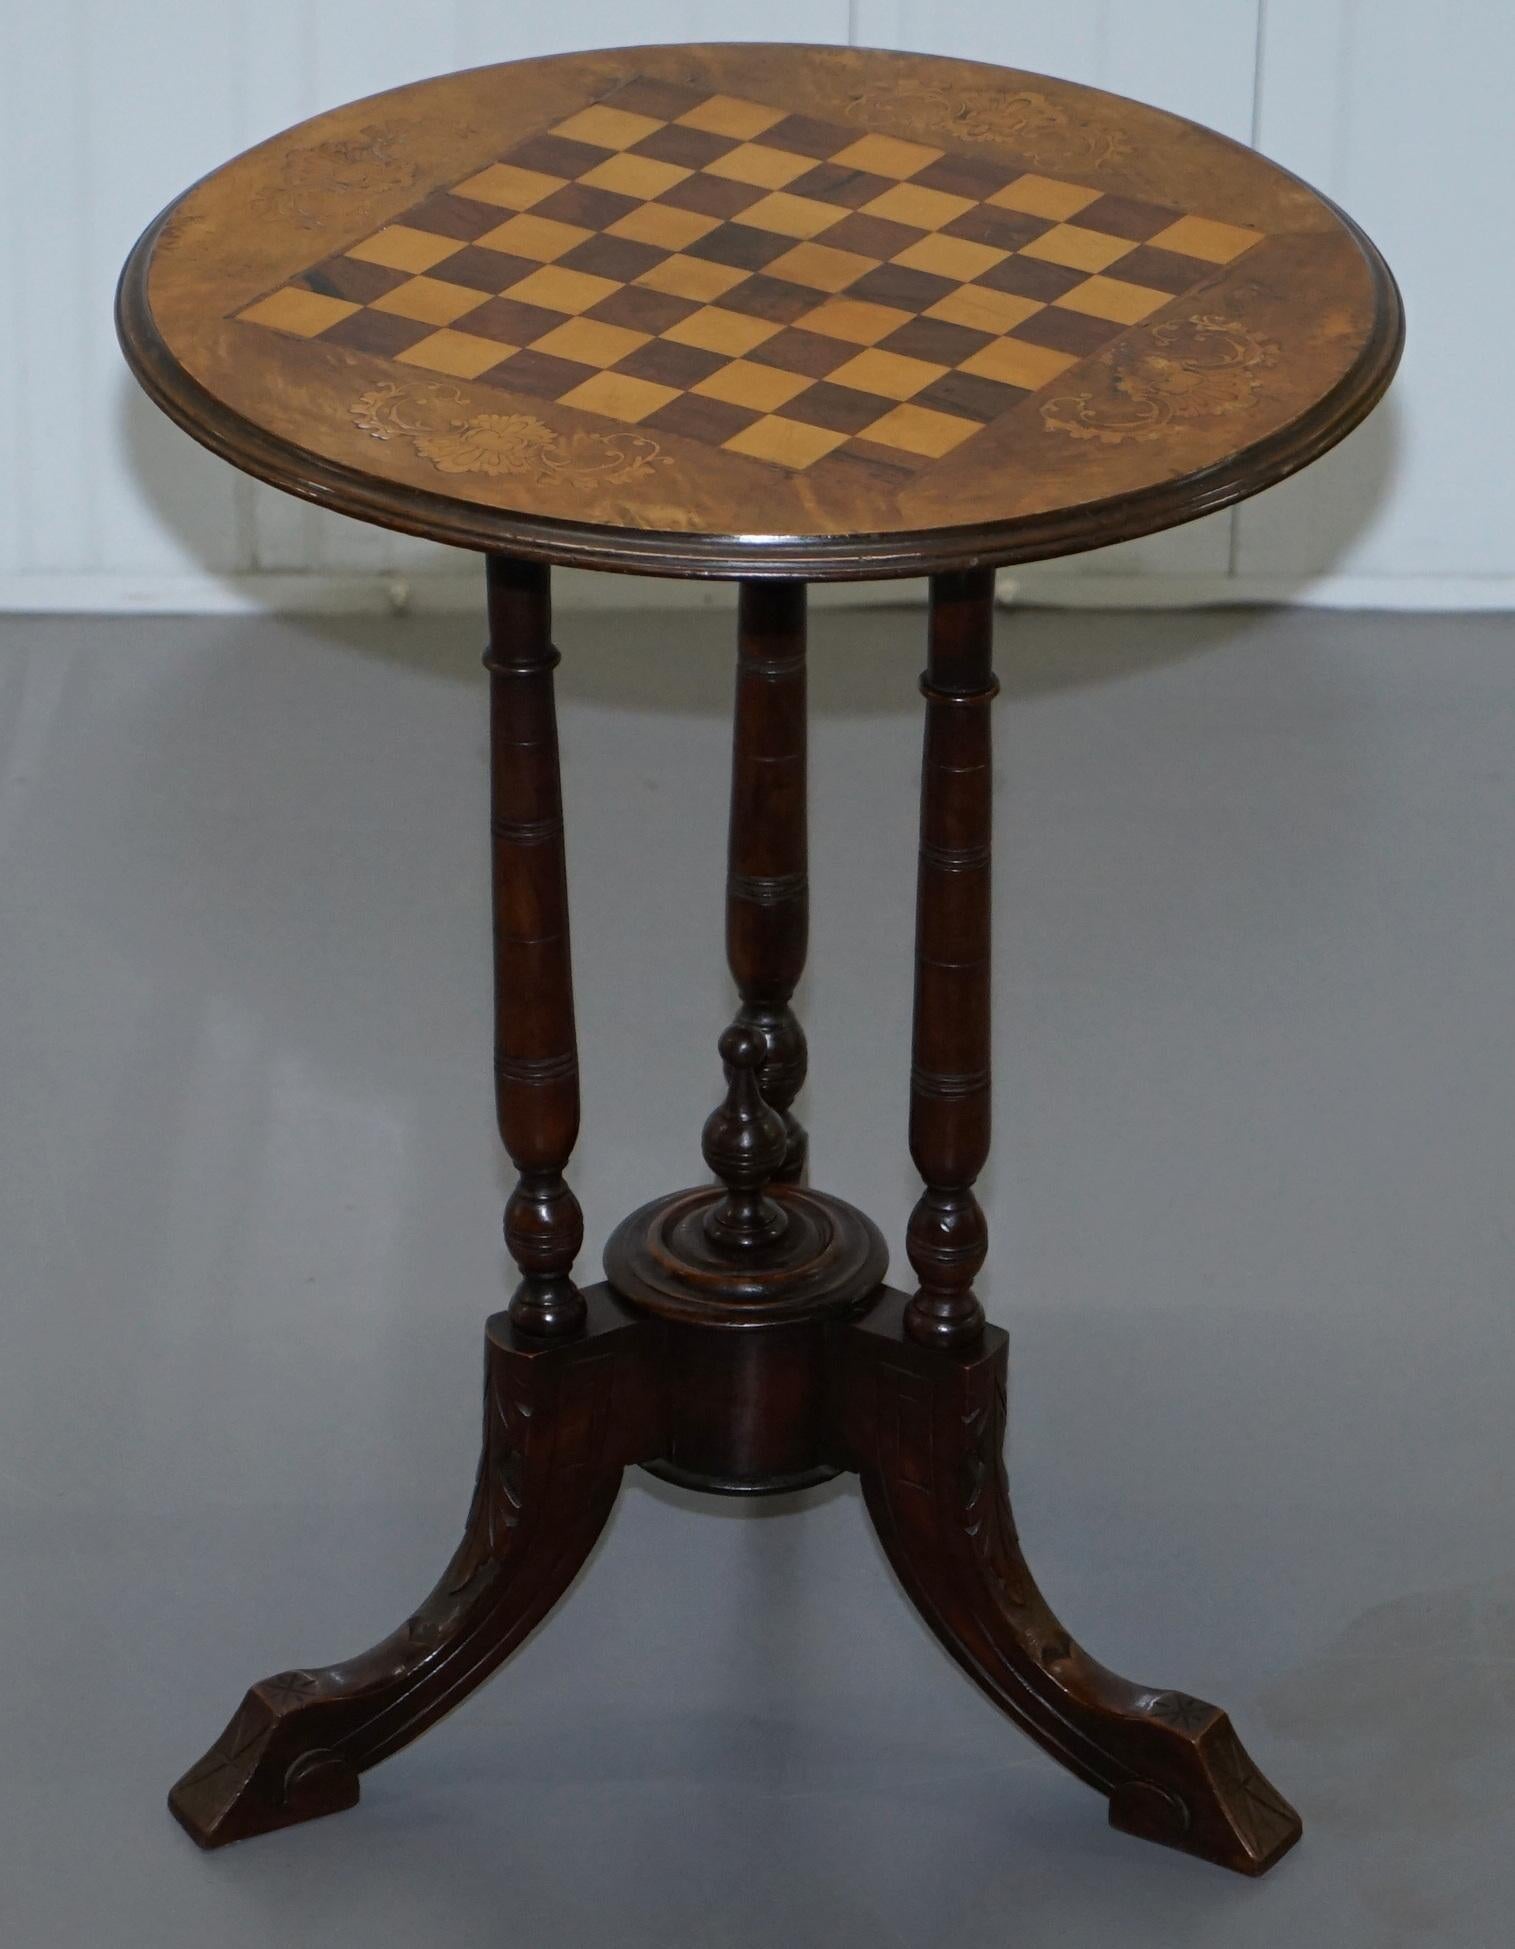 We are delighted to offer for sale this lovely small Victorian 1880 walnut & boxwood marquetry inlaid Chess games table

A very good looking well made and function piece of furniture, extremely decorative, the top has gorgeous Walnut & boxwood